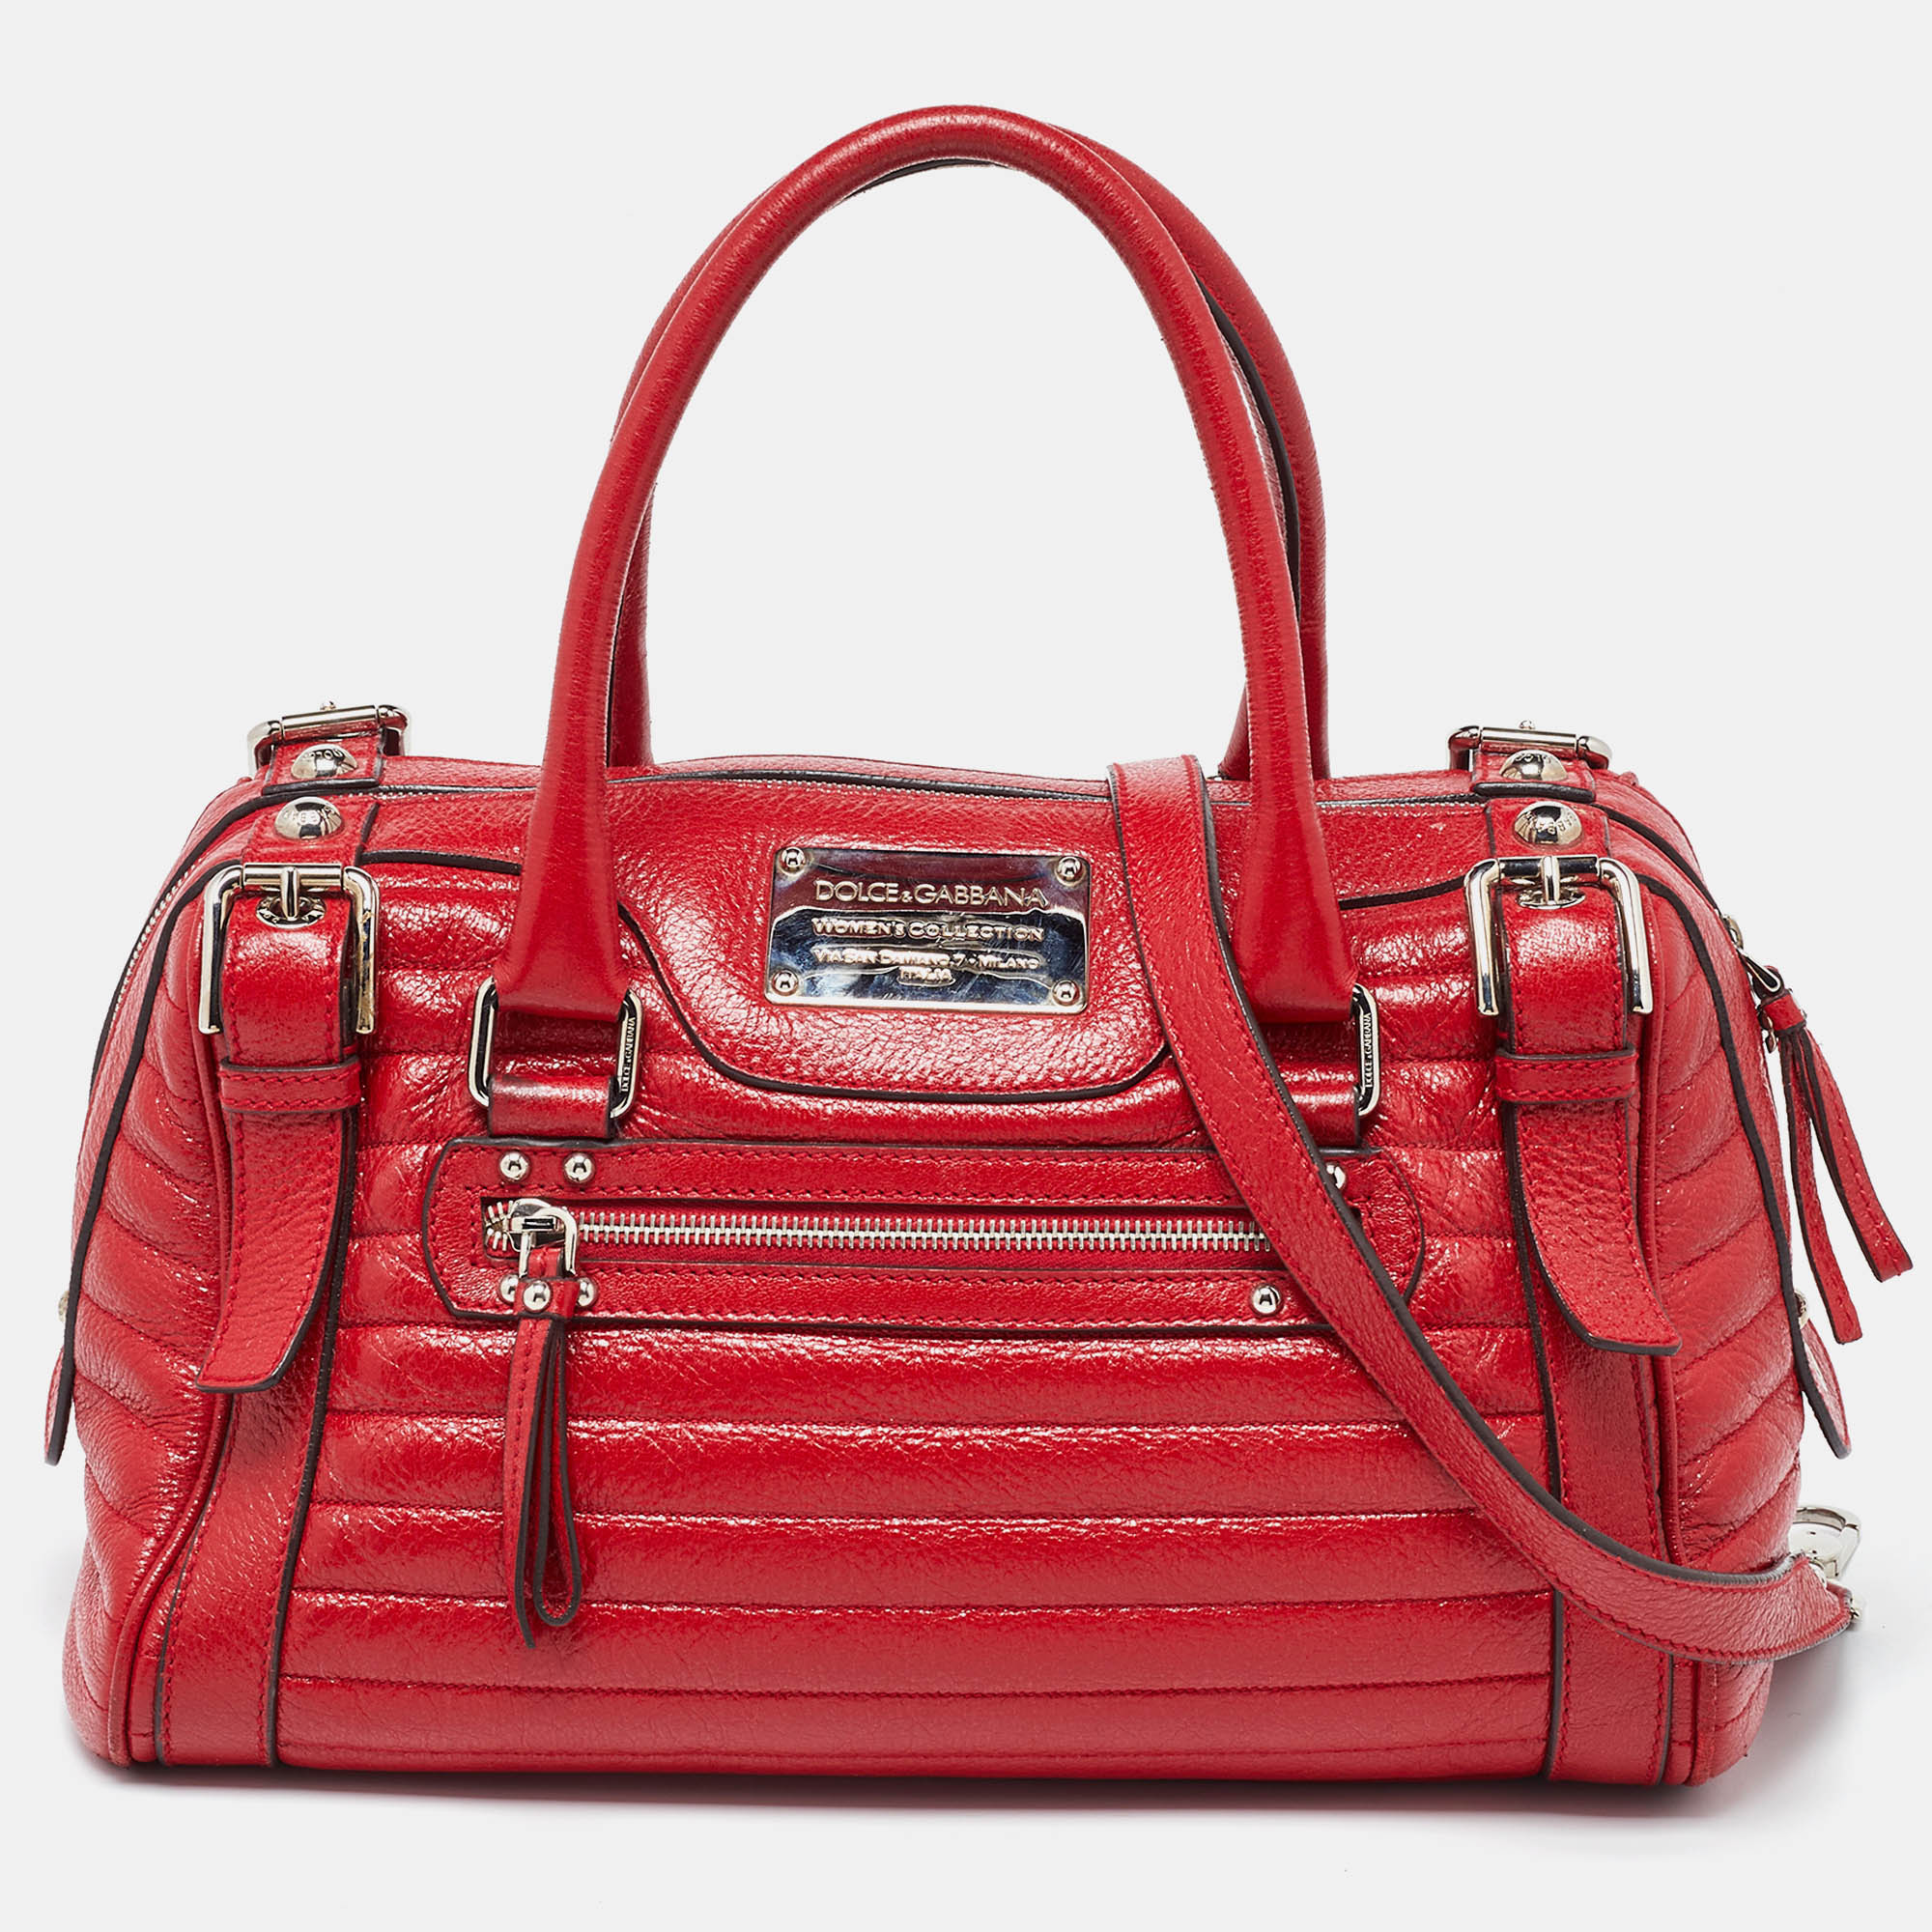 Pre-owned Dolce & Gabbana Red Leather Miss Easy Way Satchel